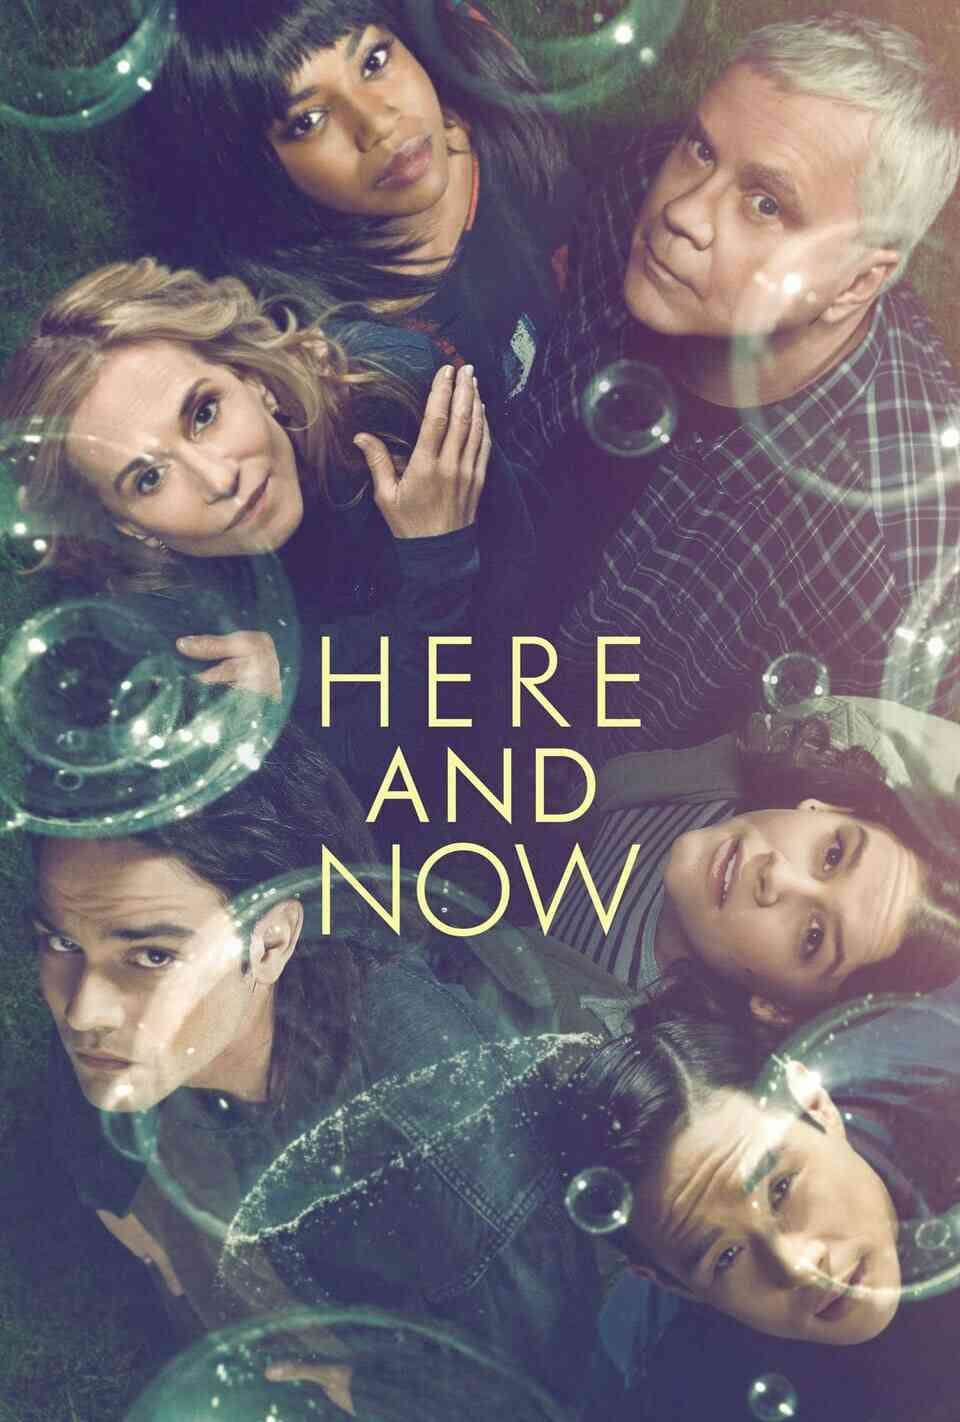 Read Here and Now screenplay (poster)